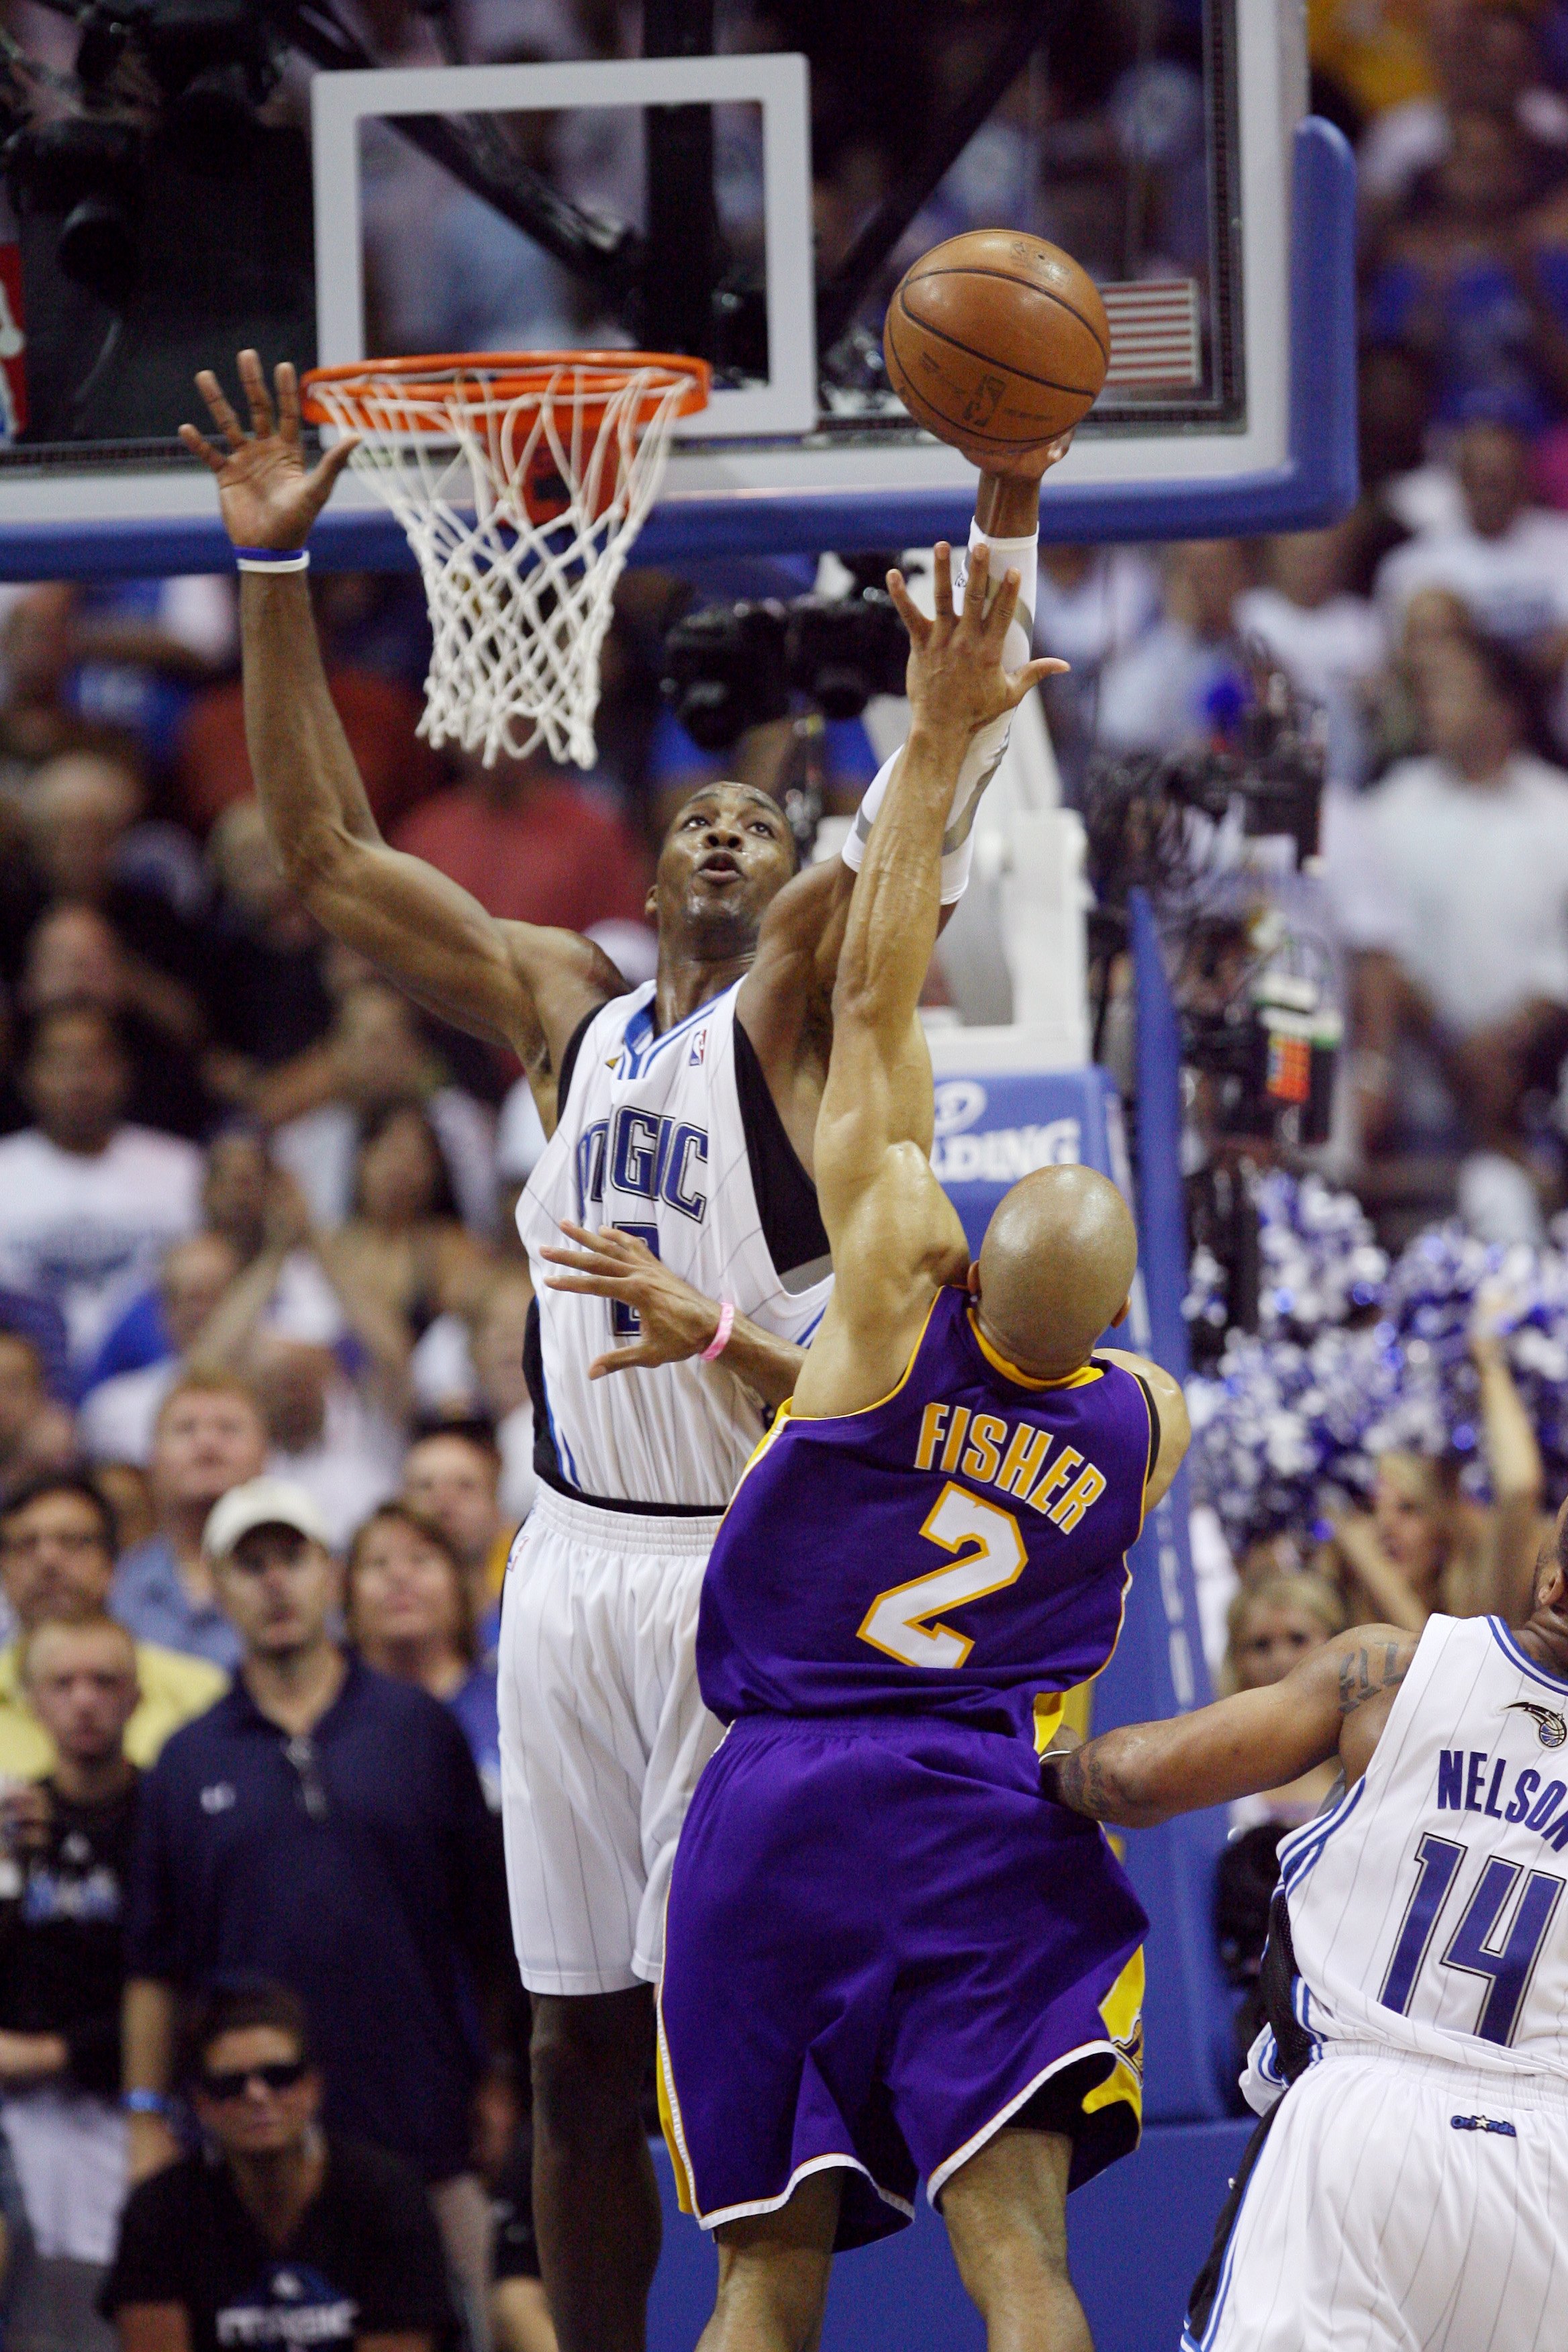 ORLANDO, FL - JUNE 11:  Dwight Howard #12 of the Orlando Magic goes up to block a shot by Derek Fisher #2  of the Los Angeles Lakers in Game Four of the 2009 NBA Finals at Amway Arena on June 11, 2009 in Orlando, Florida.  The Lakers won 99-91 in overtime